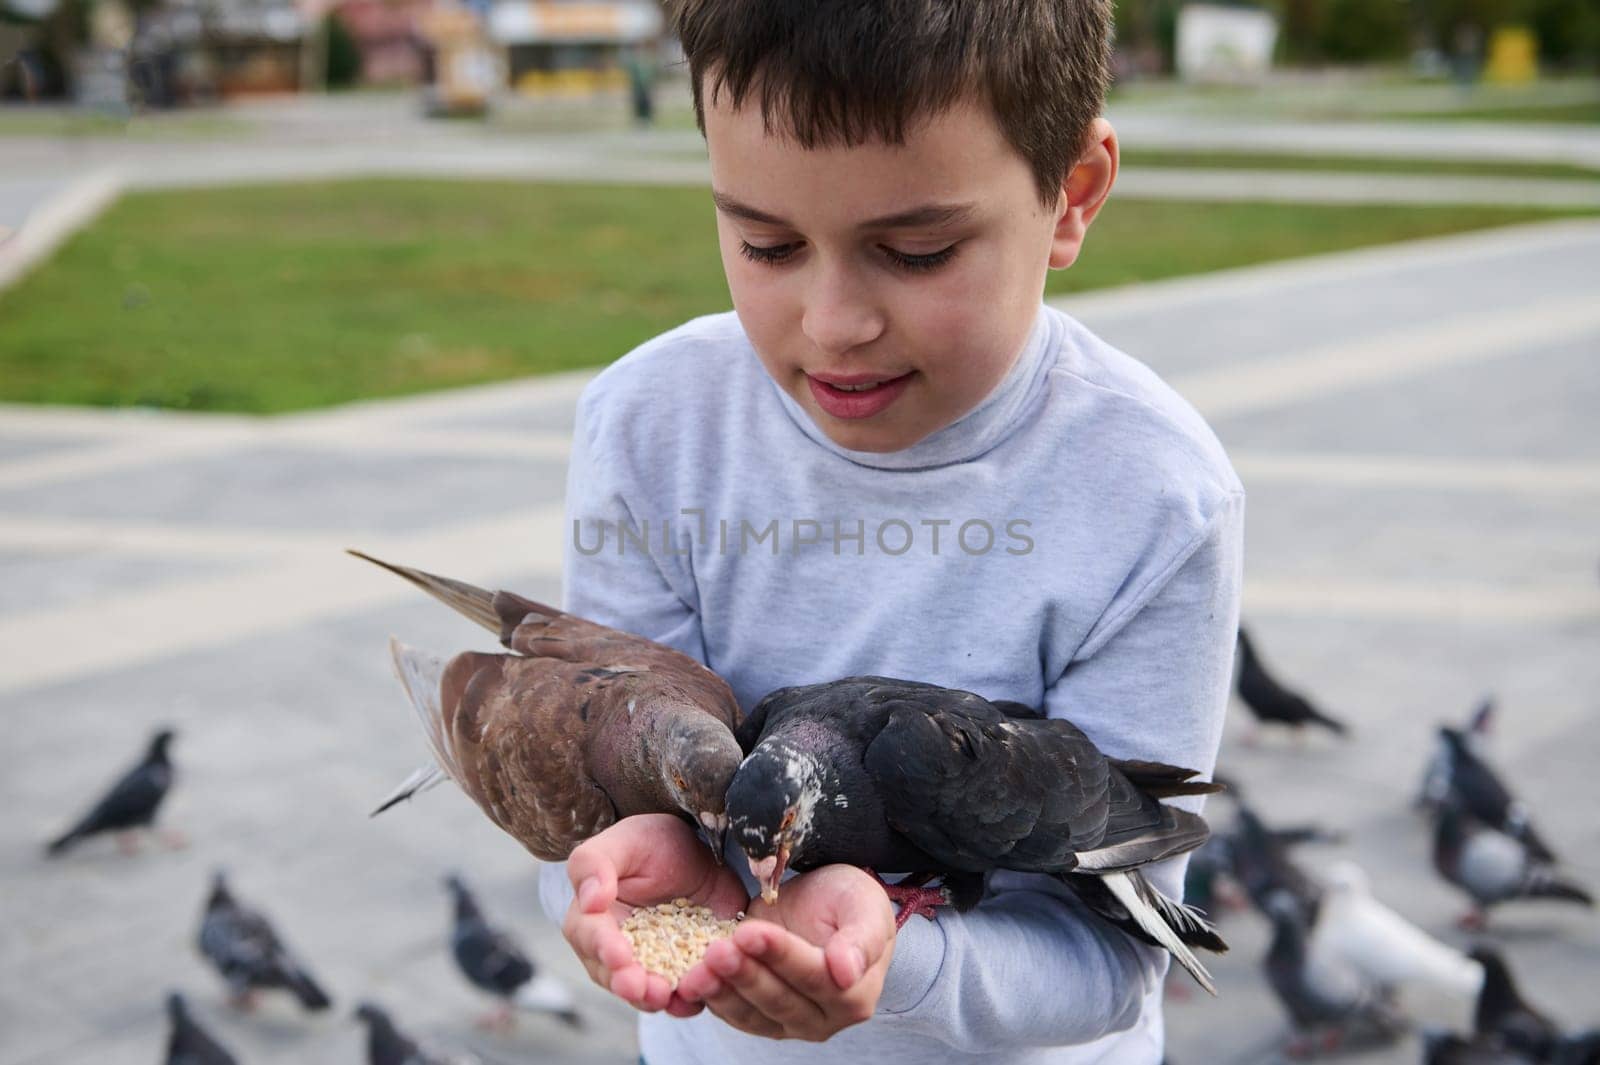 Close-up portrait of adorable pre teen boy having fun during family outing, feeding birds from his hands in park square by artgf